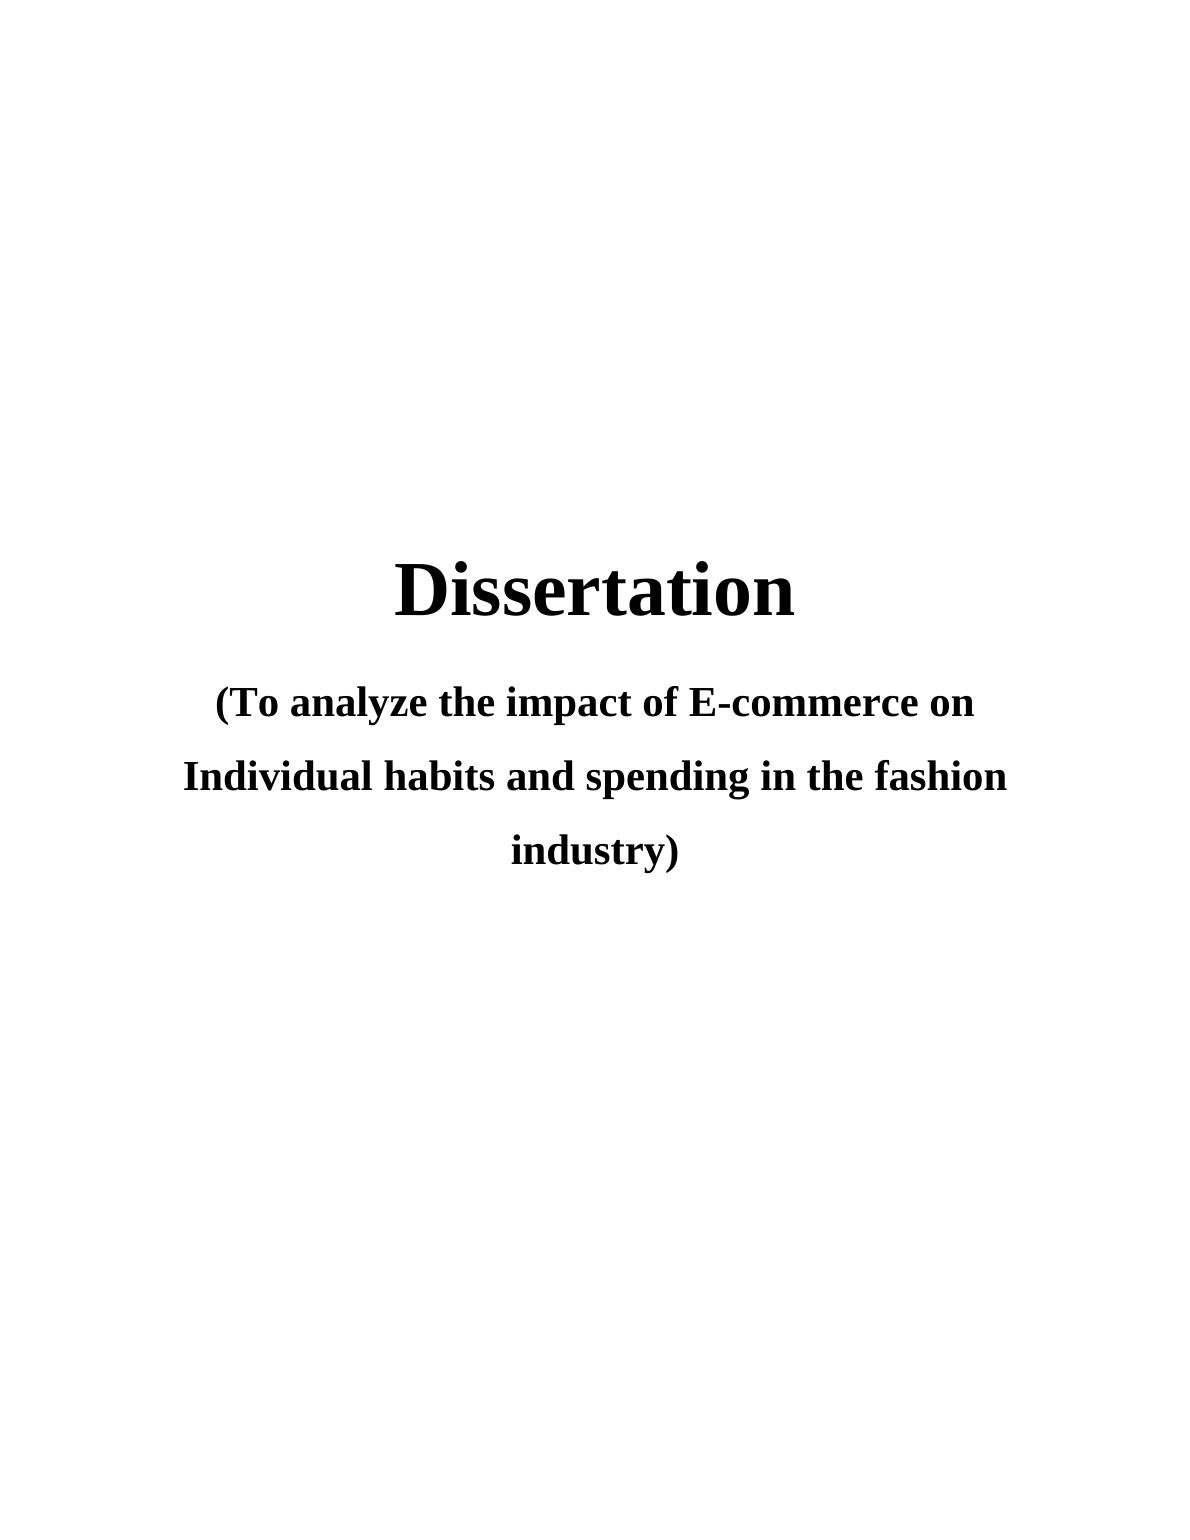 The Impact of ECommerce on Individual Habits and Spending in the Fashion Industry: Dissertation (To analyze the impact of Ecommerce on Individual habits and spending in the fashion industry)_1